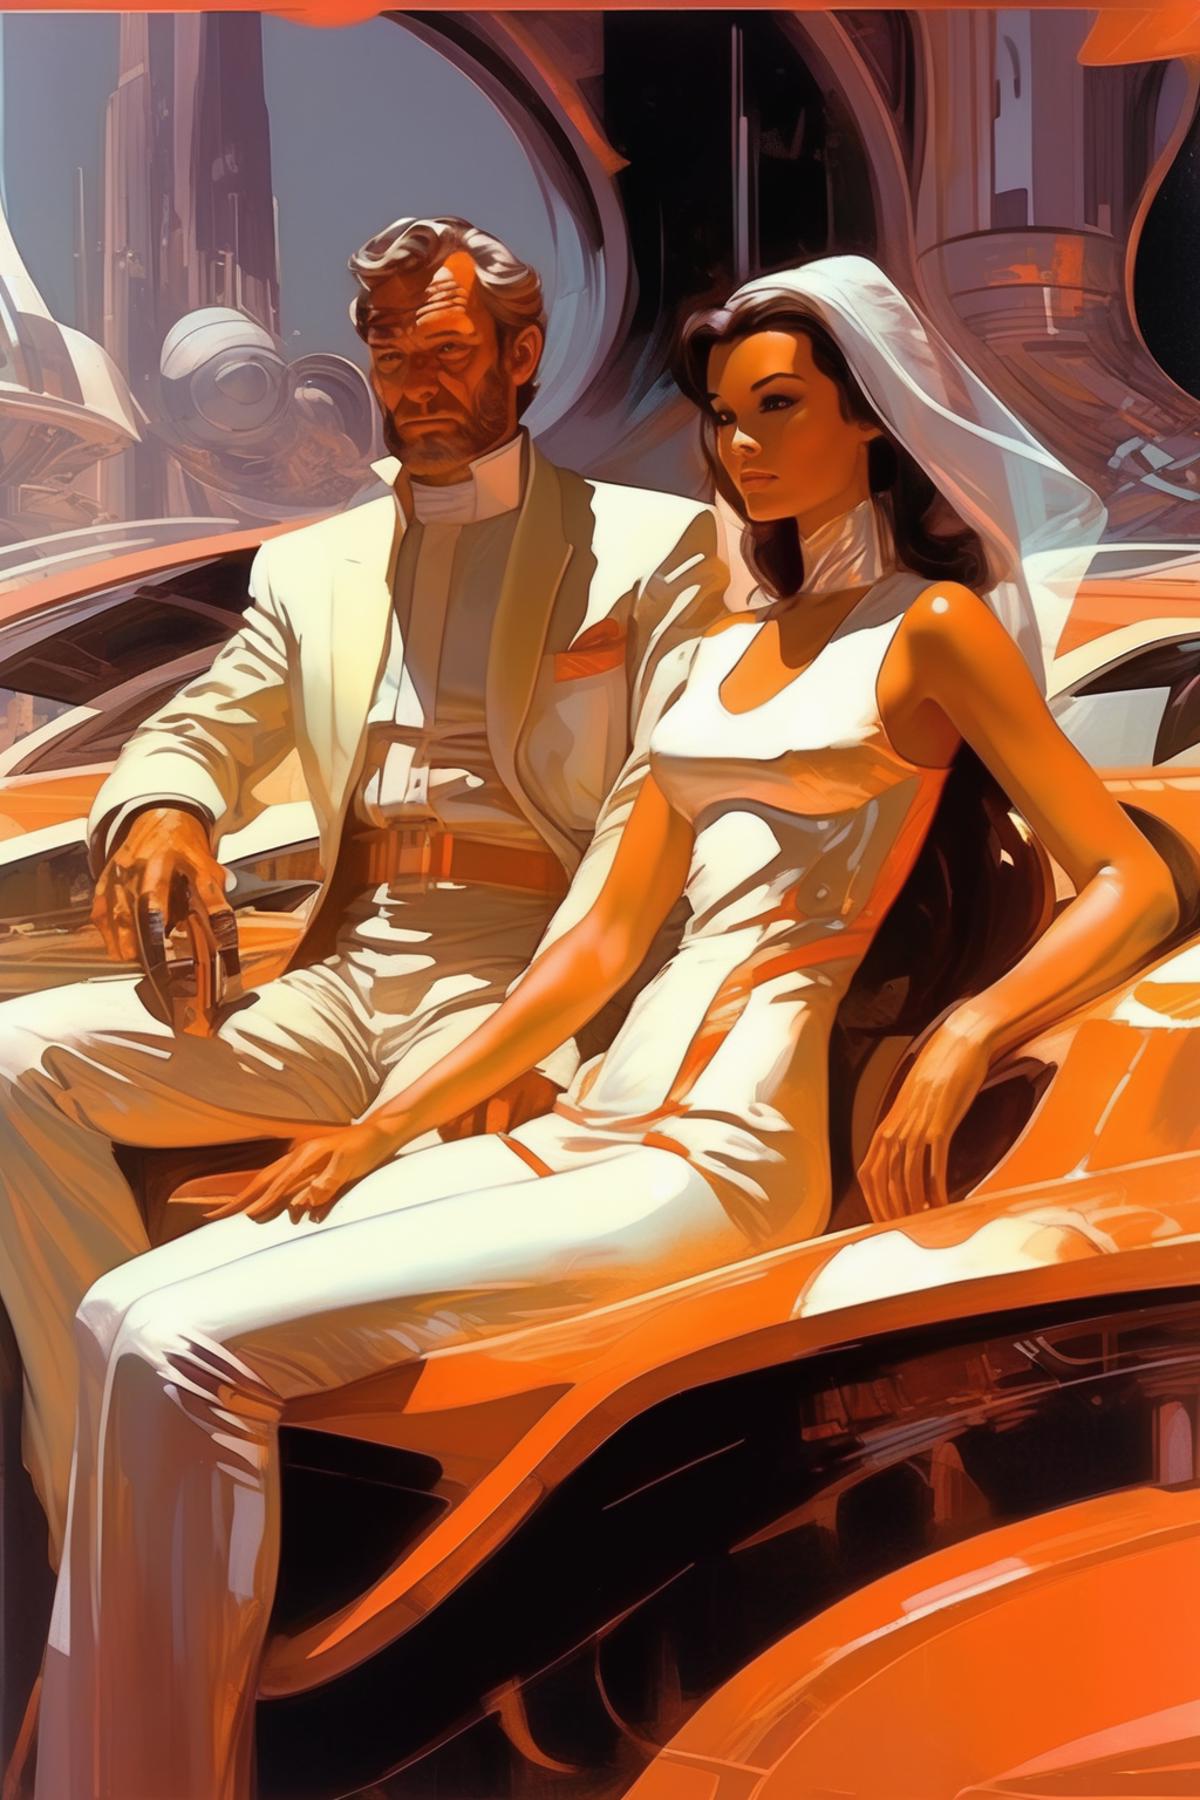 Syd Mead Style image by Kappa_Neuro